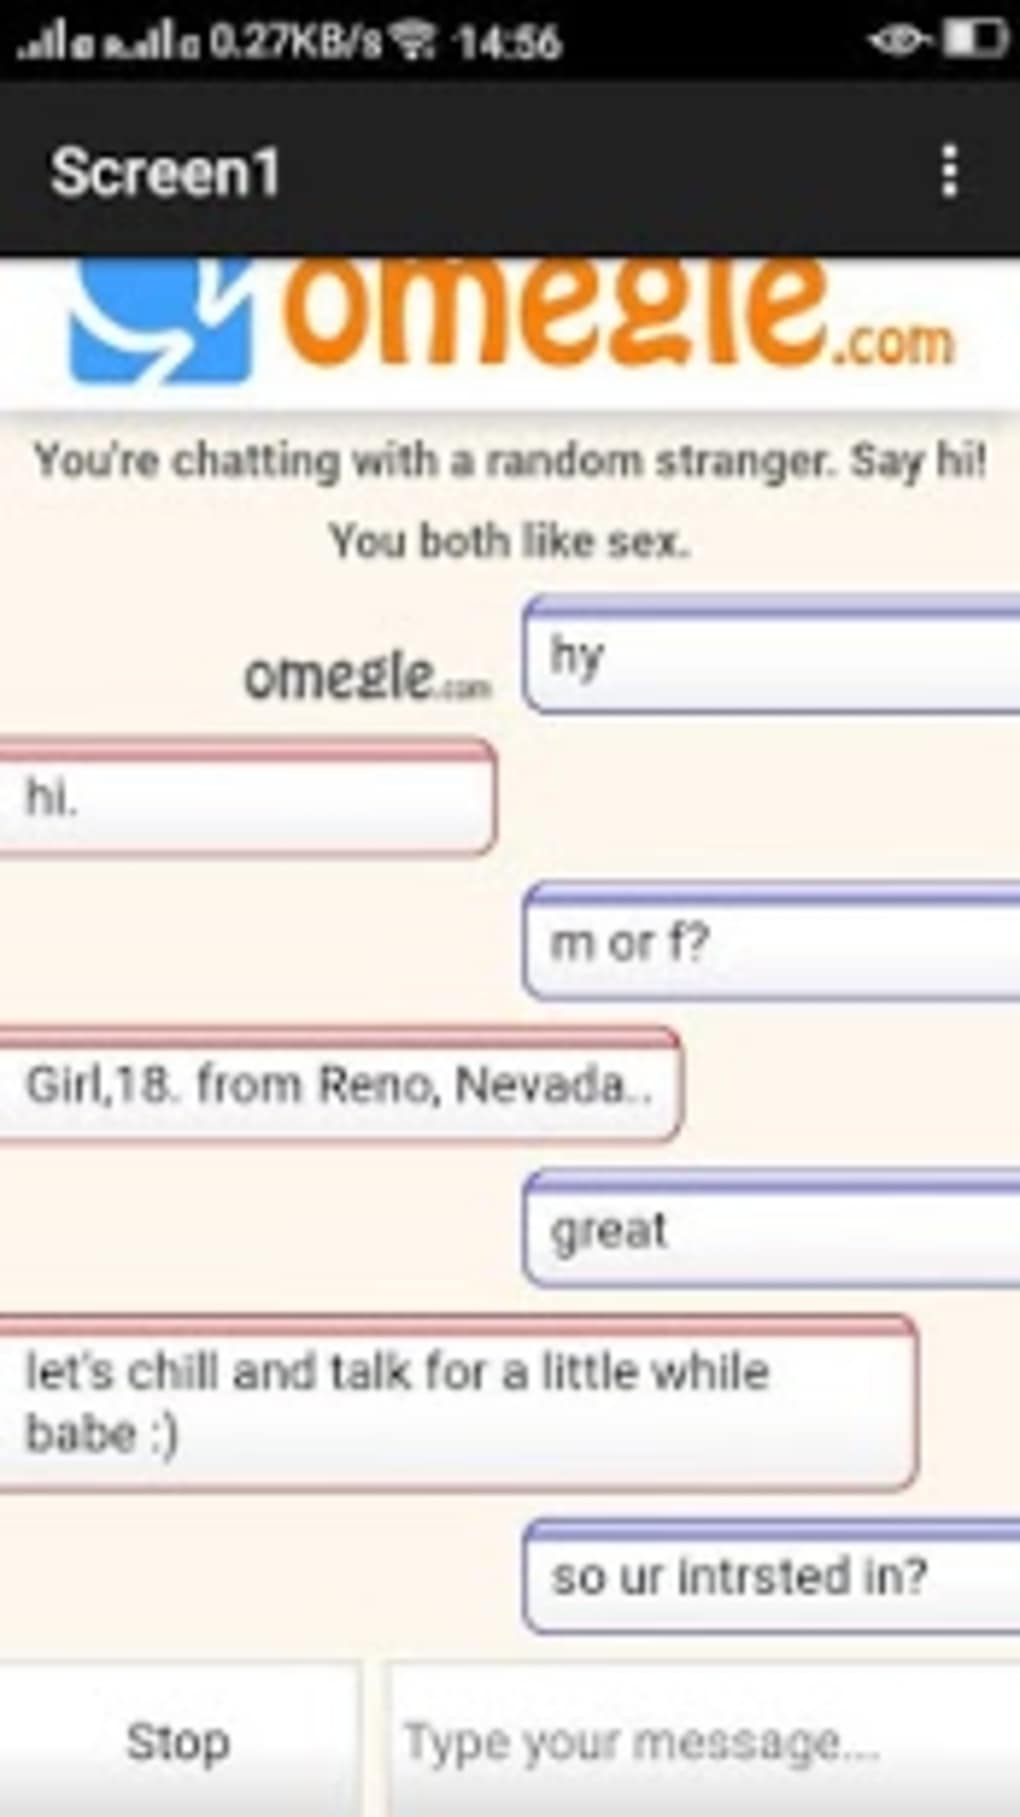 Omegle talk to strangers chat